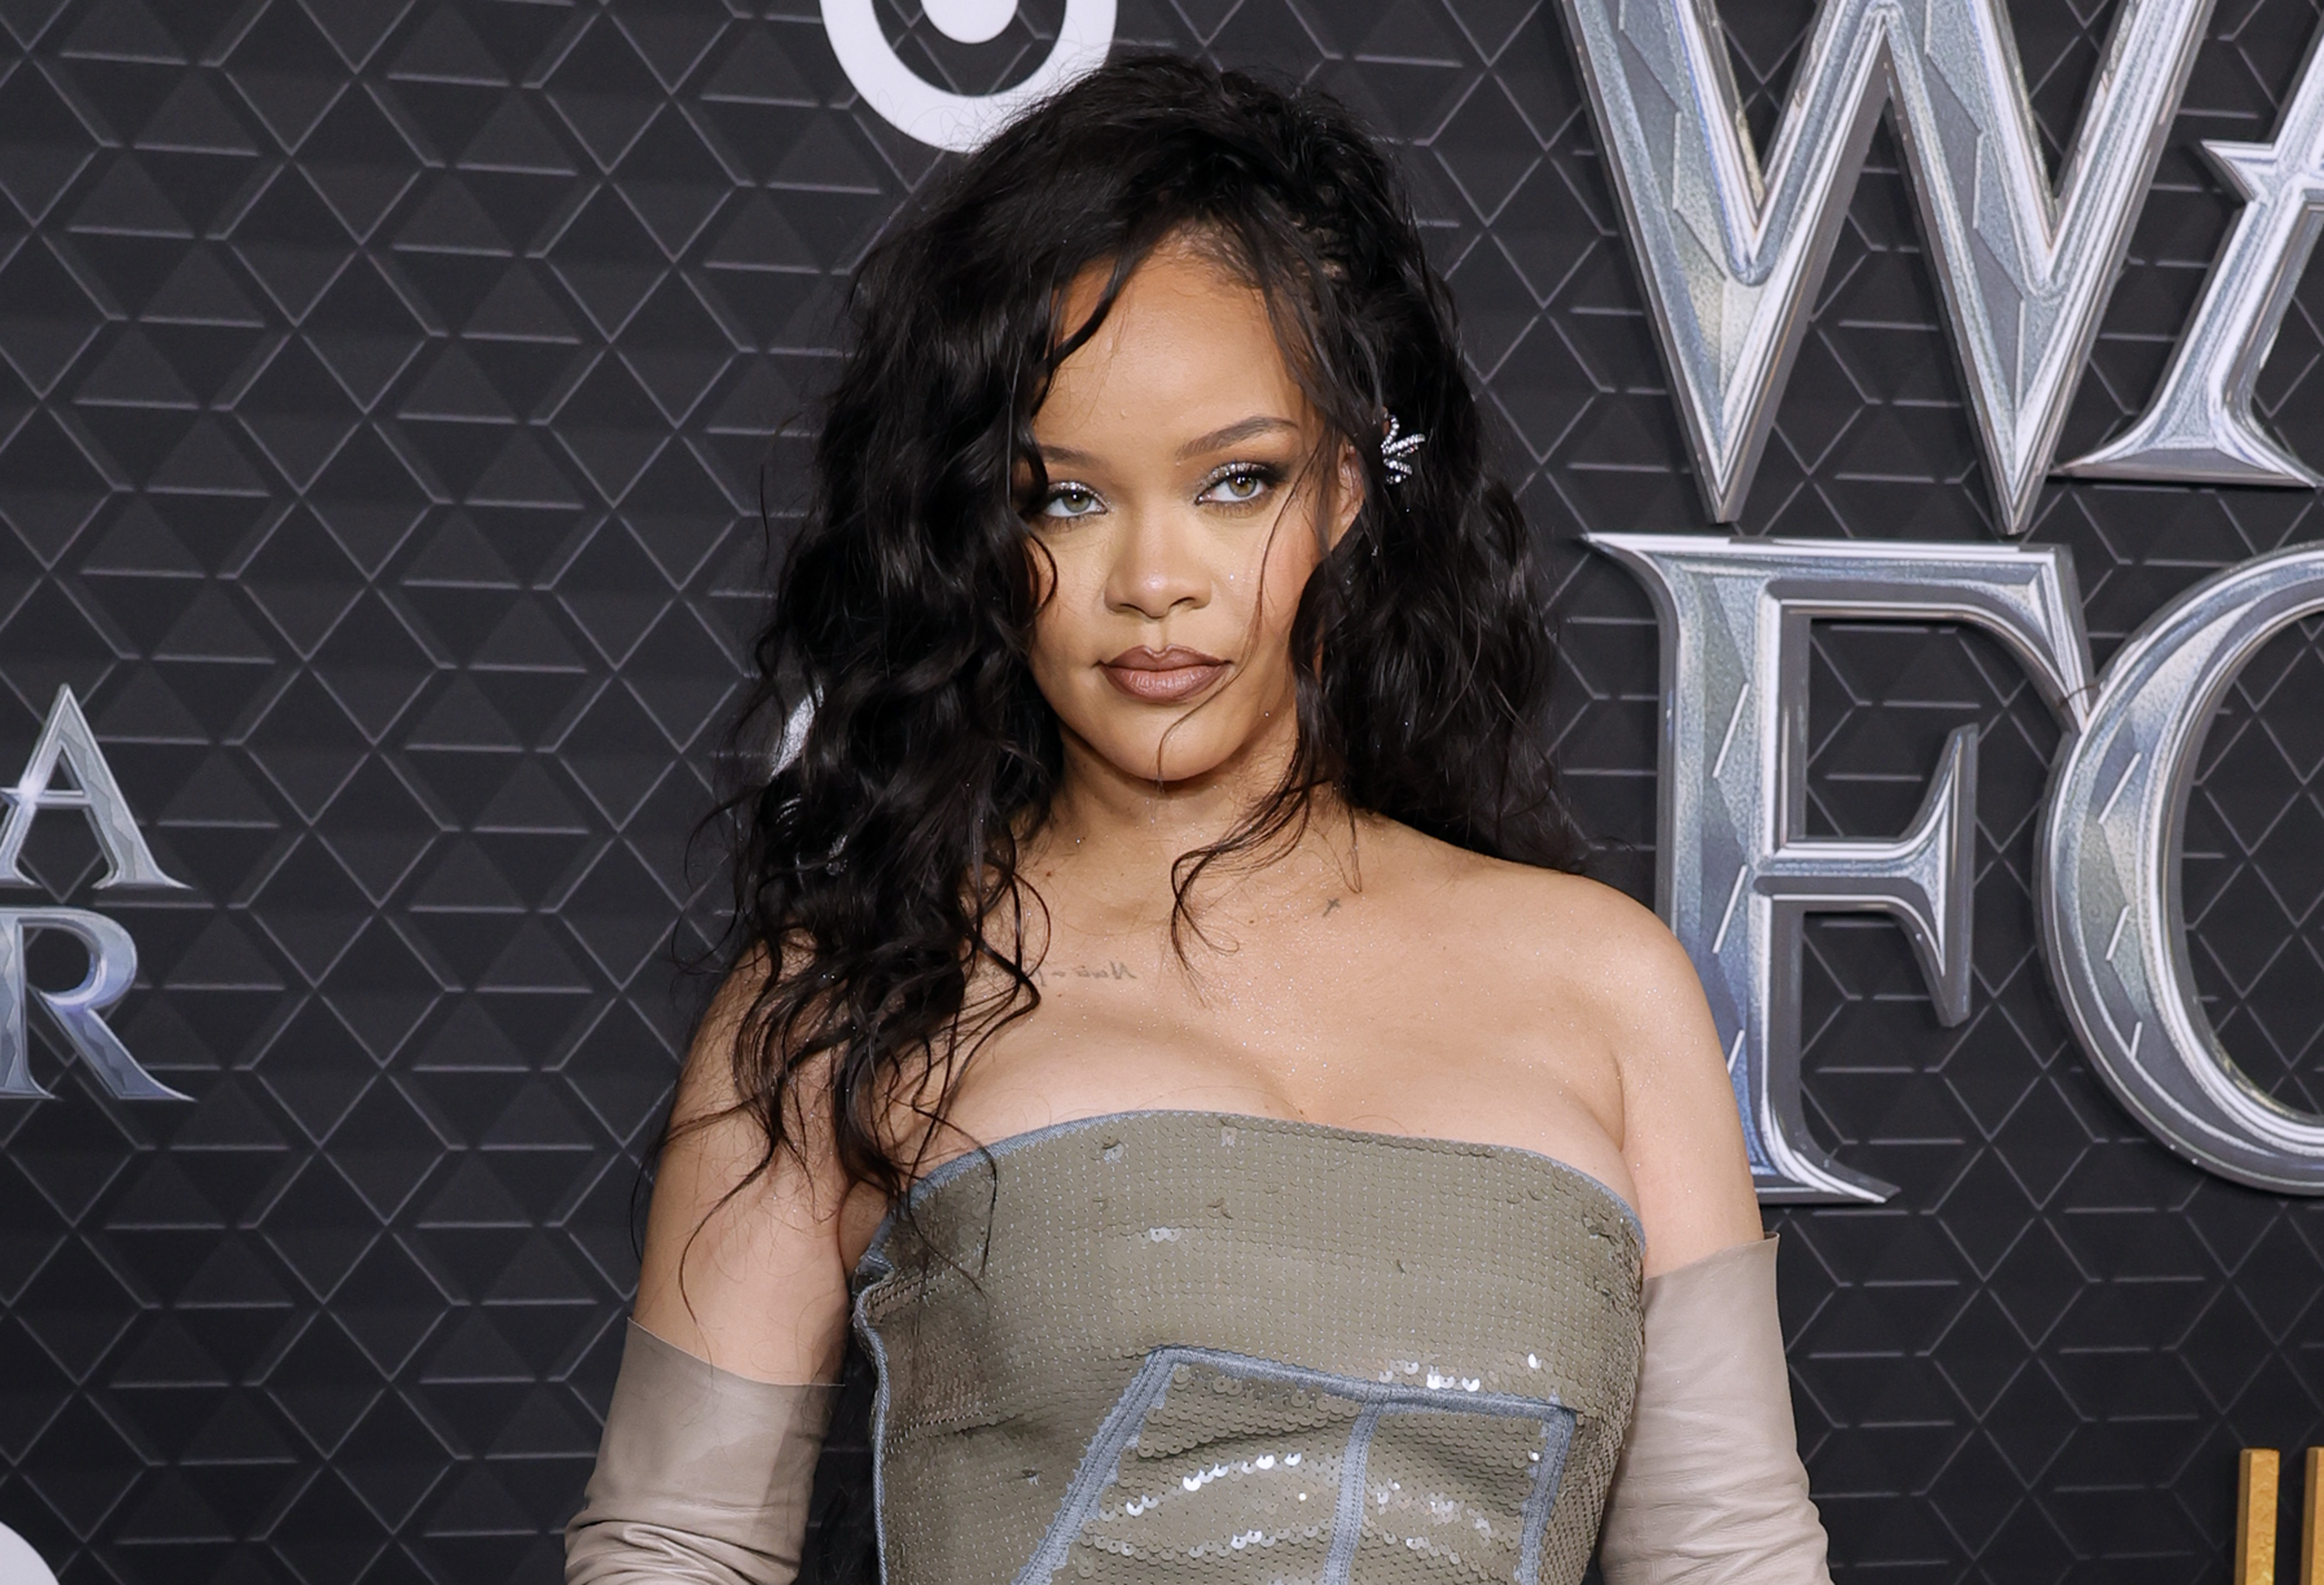 Rihanna at the premiere of "Black Panther 2: Wakanda Forever" at Dolby Theatre in Hollywood, California, on October 26, 2022 | Source: Getty Images